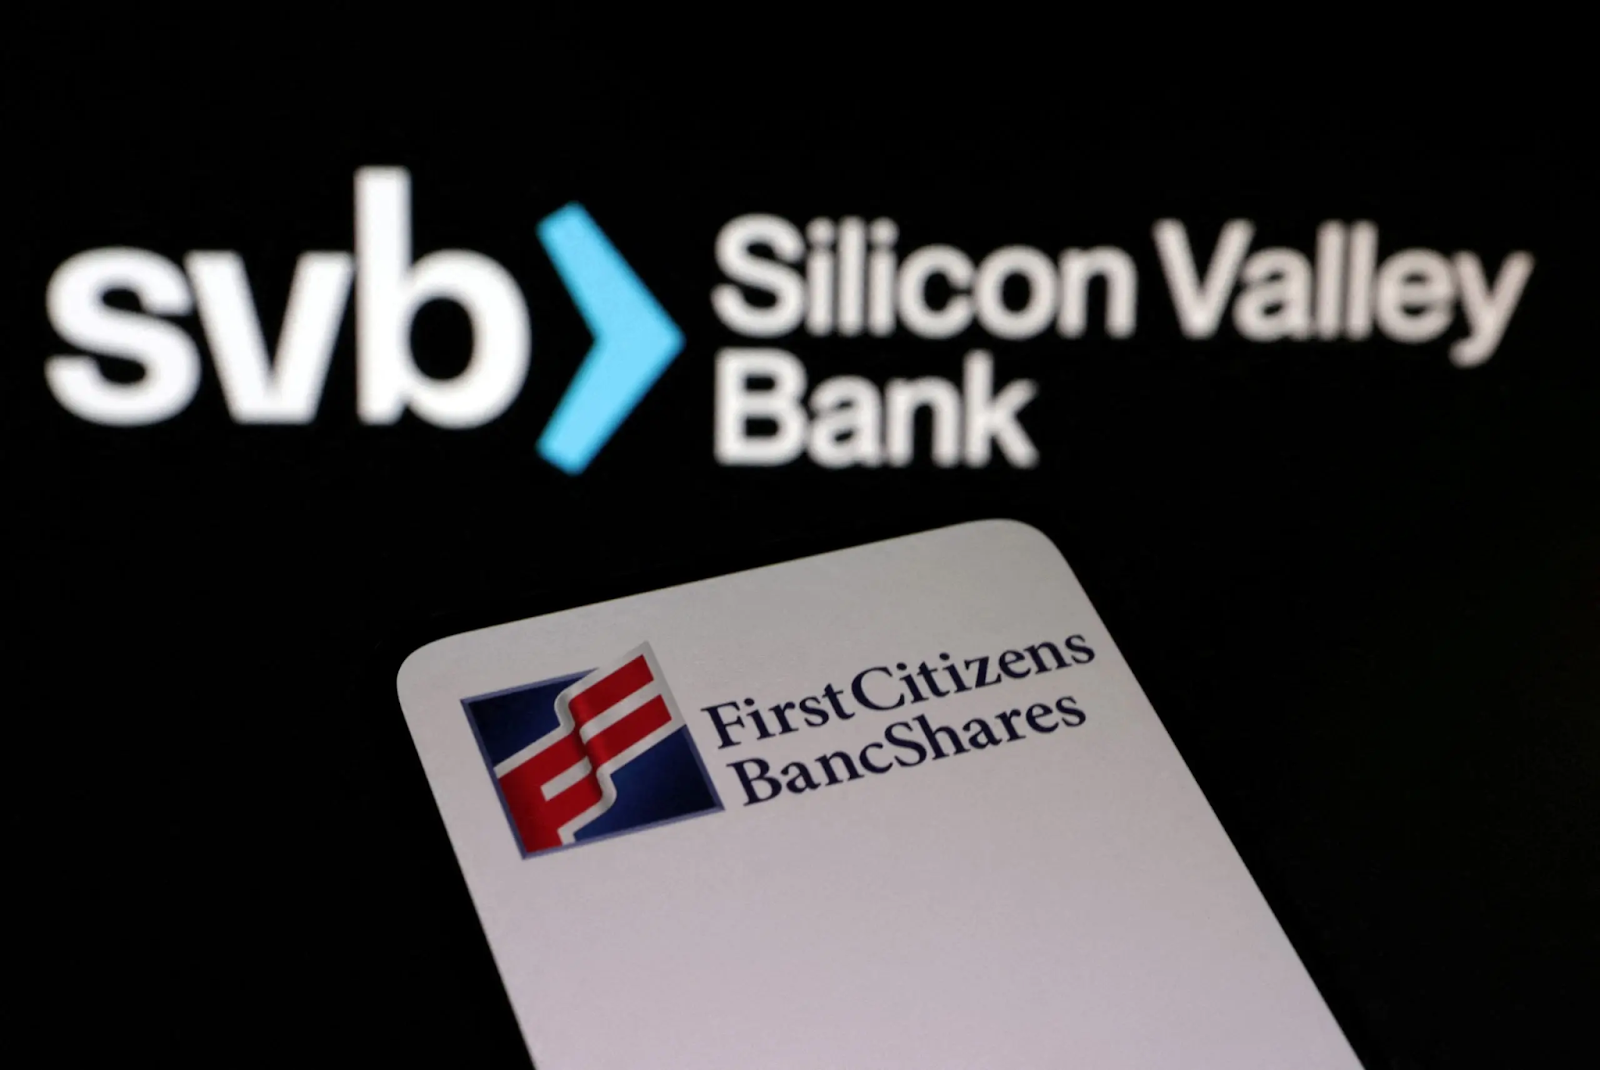 svb bought by first citizen BancShares
